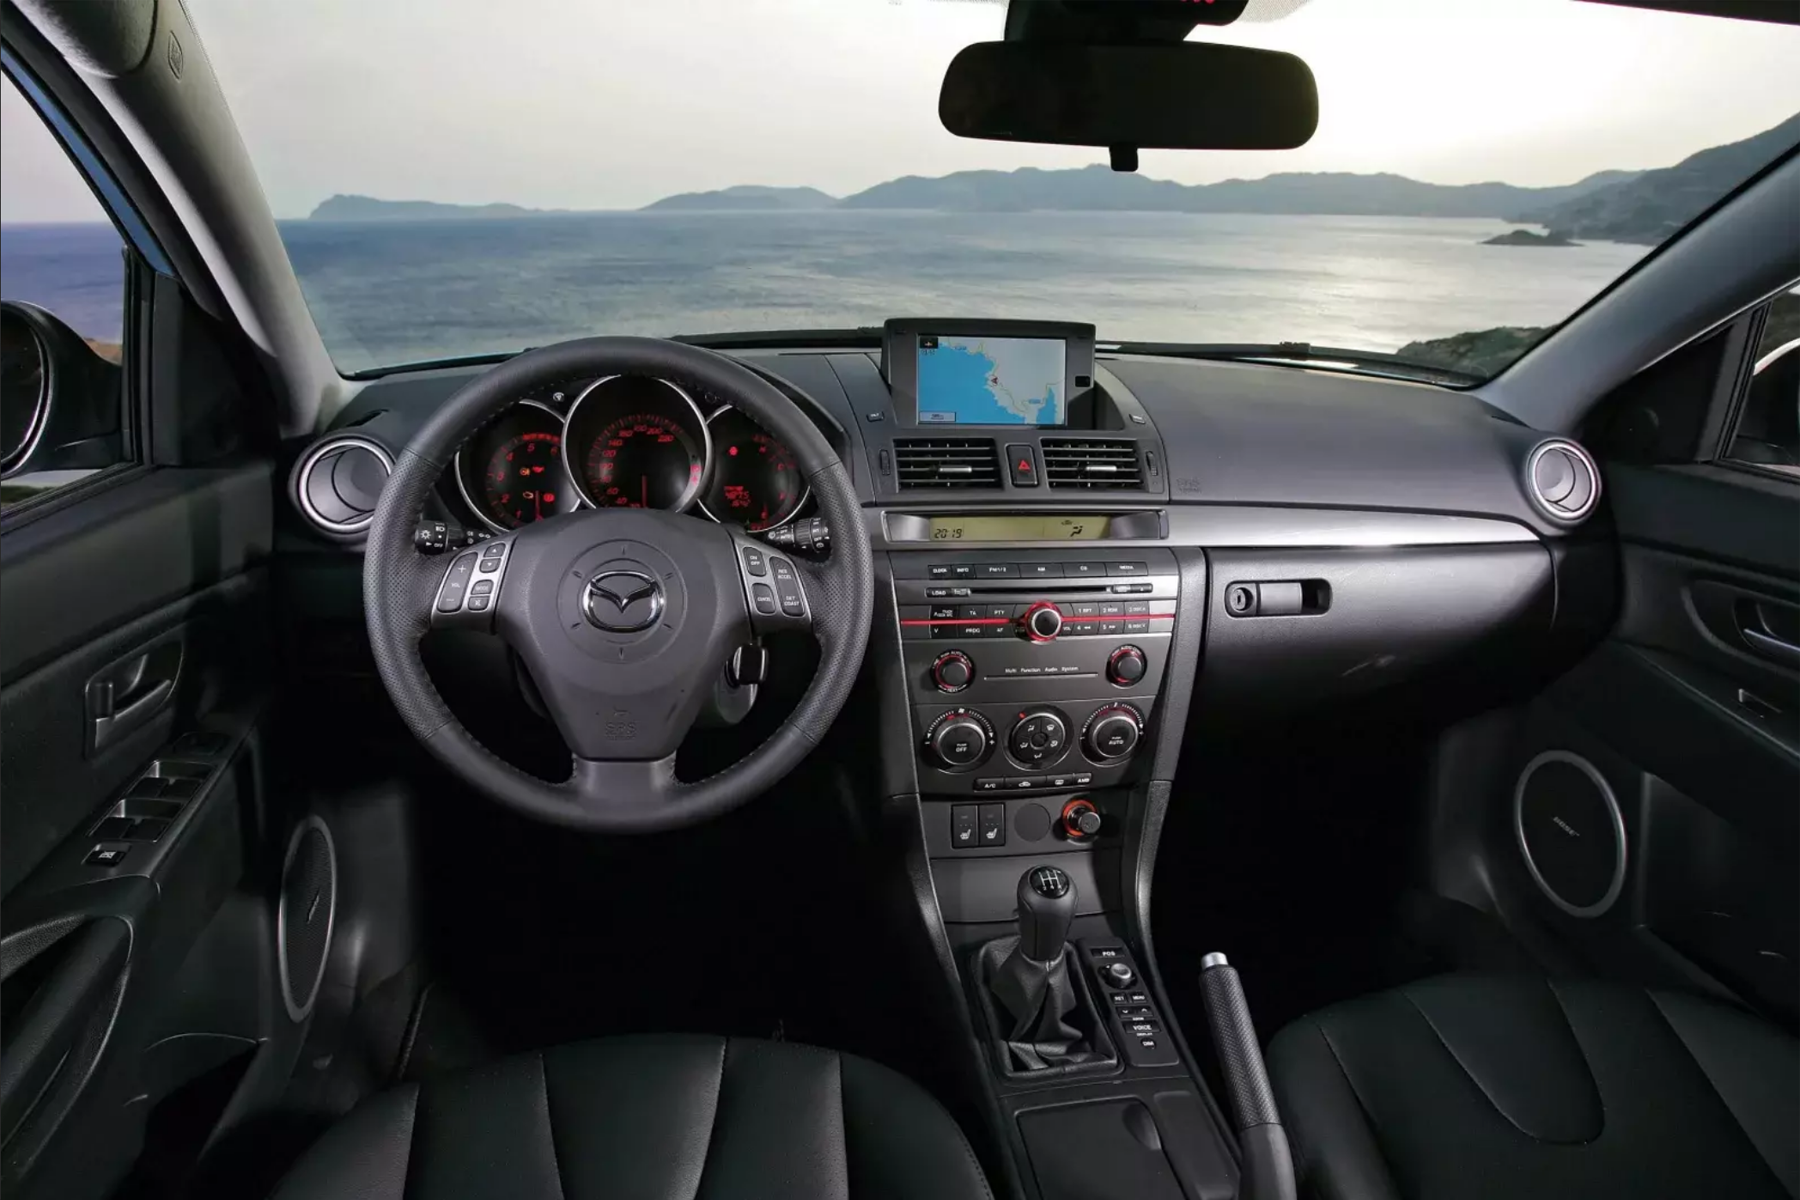 Here’s why the Mazda3 steering wheel logo recall is a serious matter